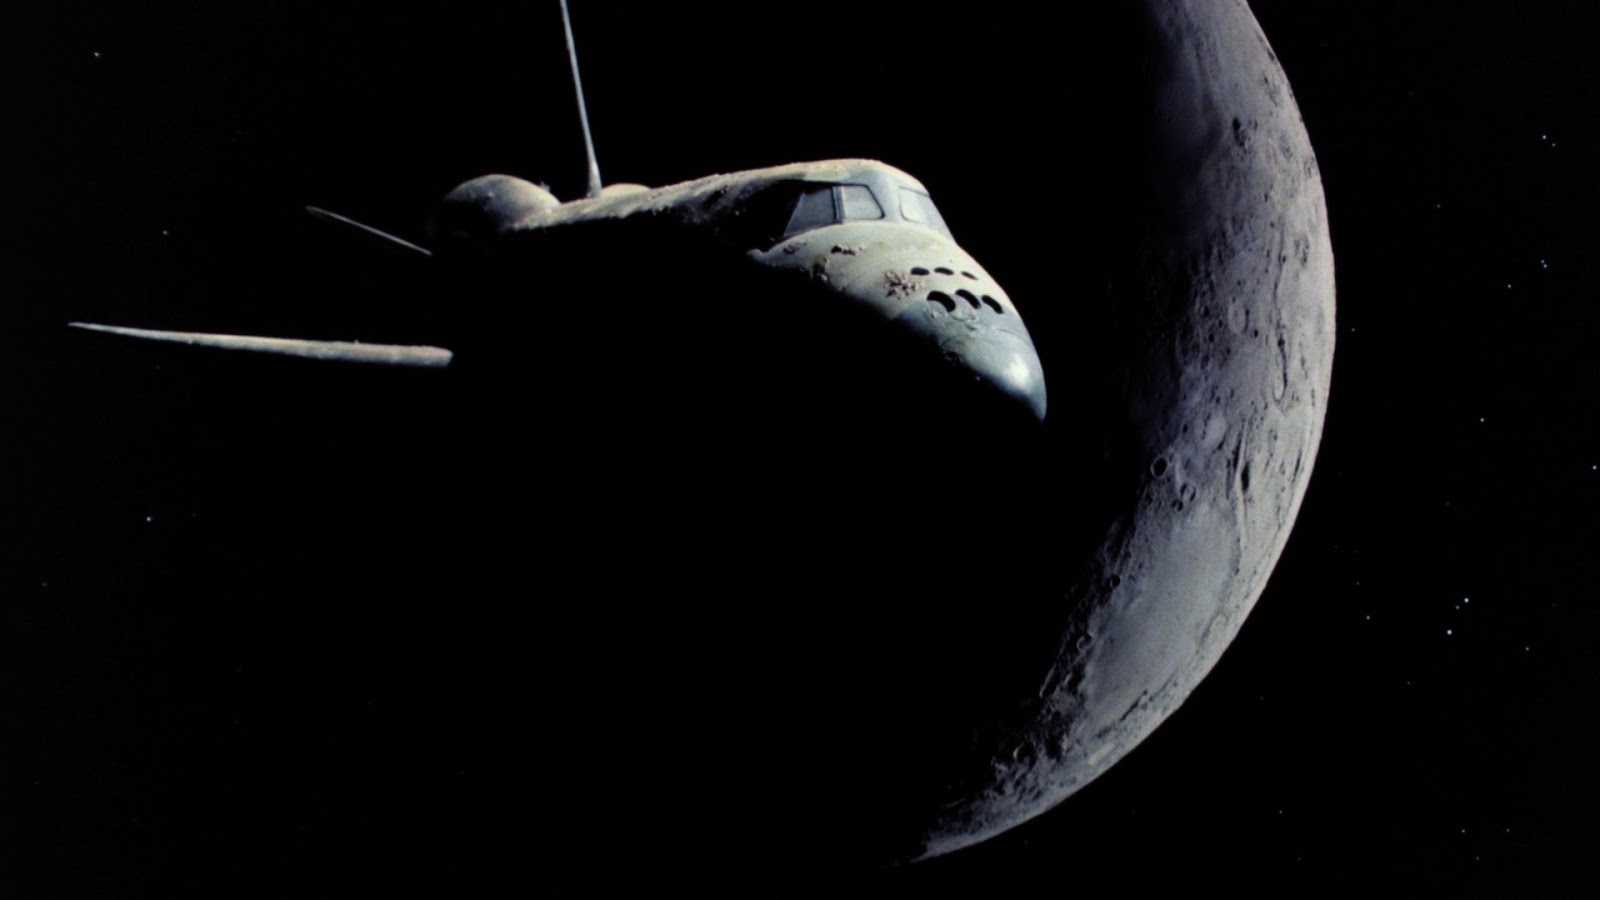 The space shuttle Discovery 8 mysteriously reappeared in lunar orbit in The Dark Side of the Moon (1990)